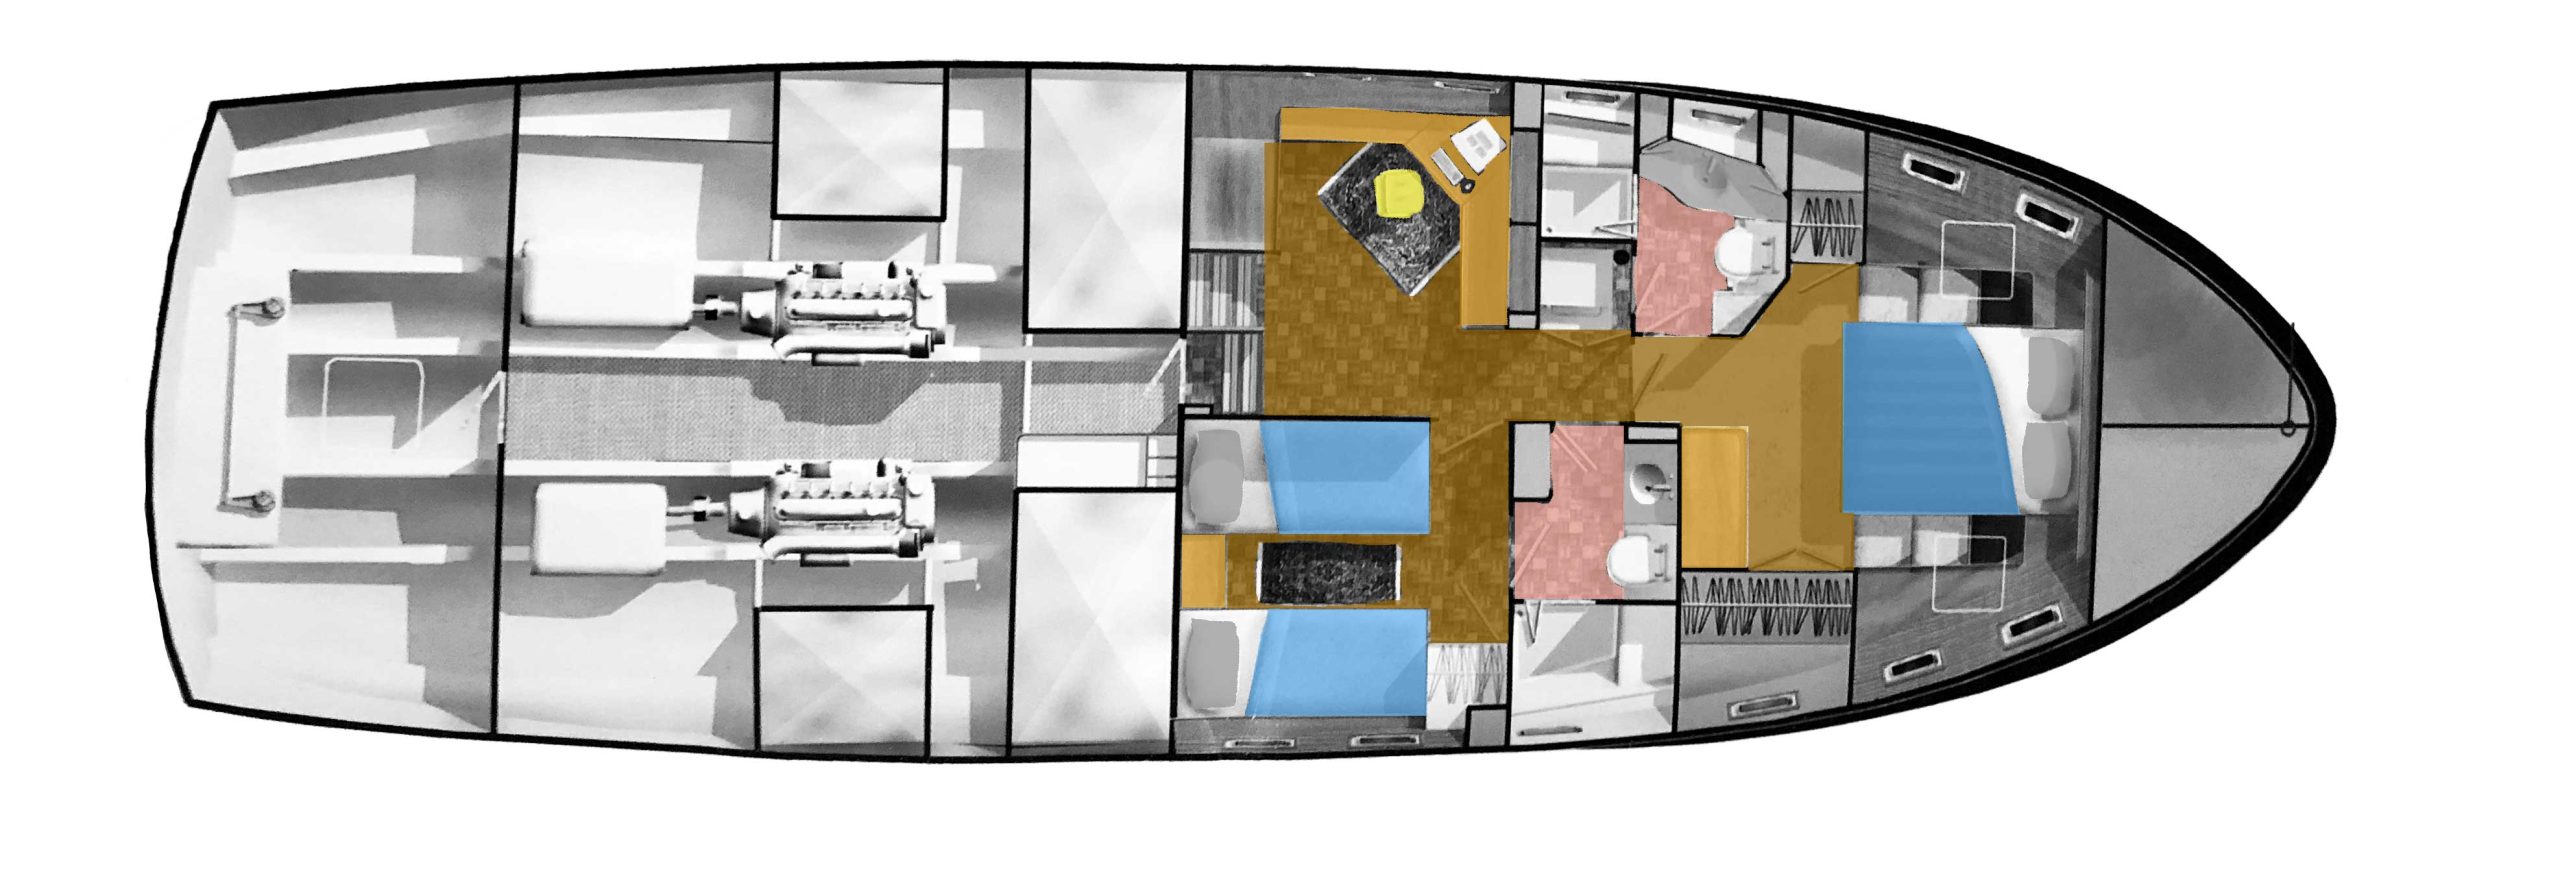 LAYOUT: Lower Level – Office Utility, Heads, Owners Cabin